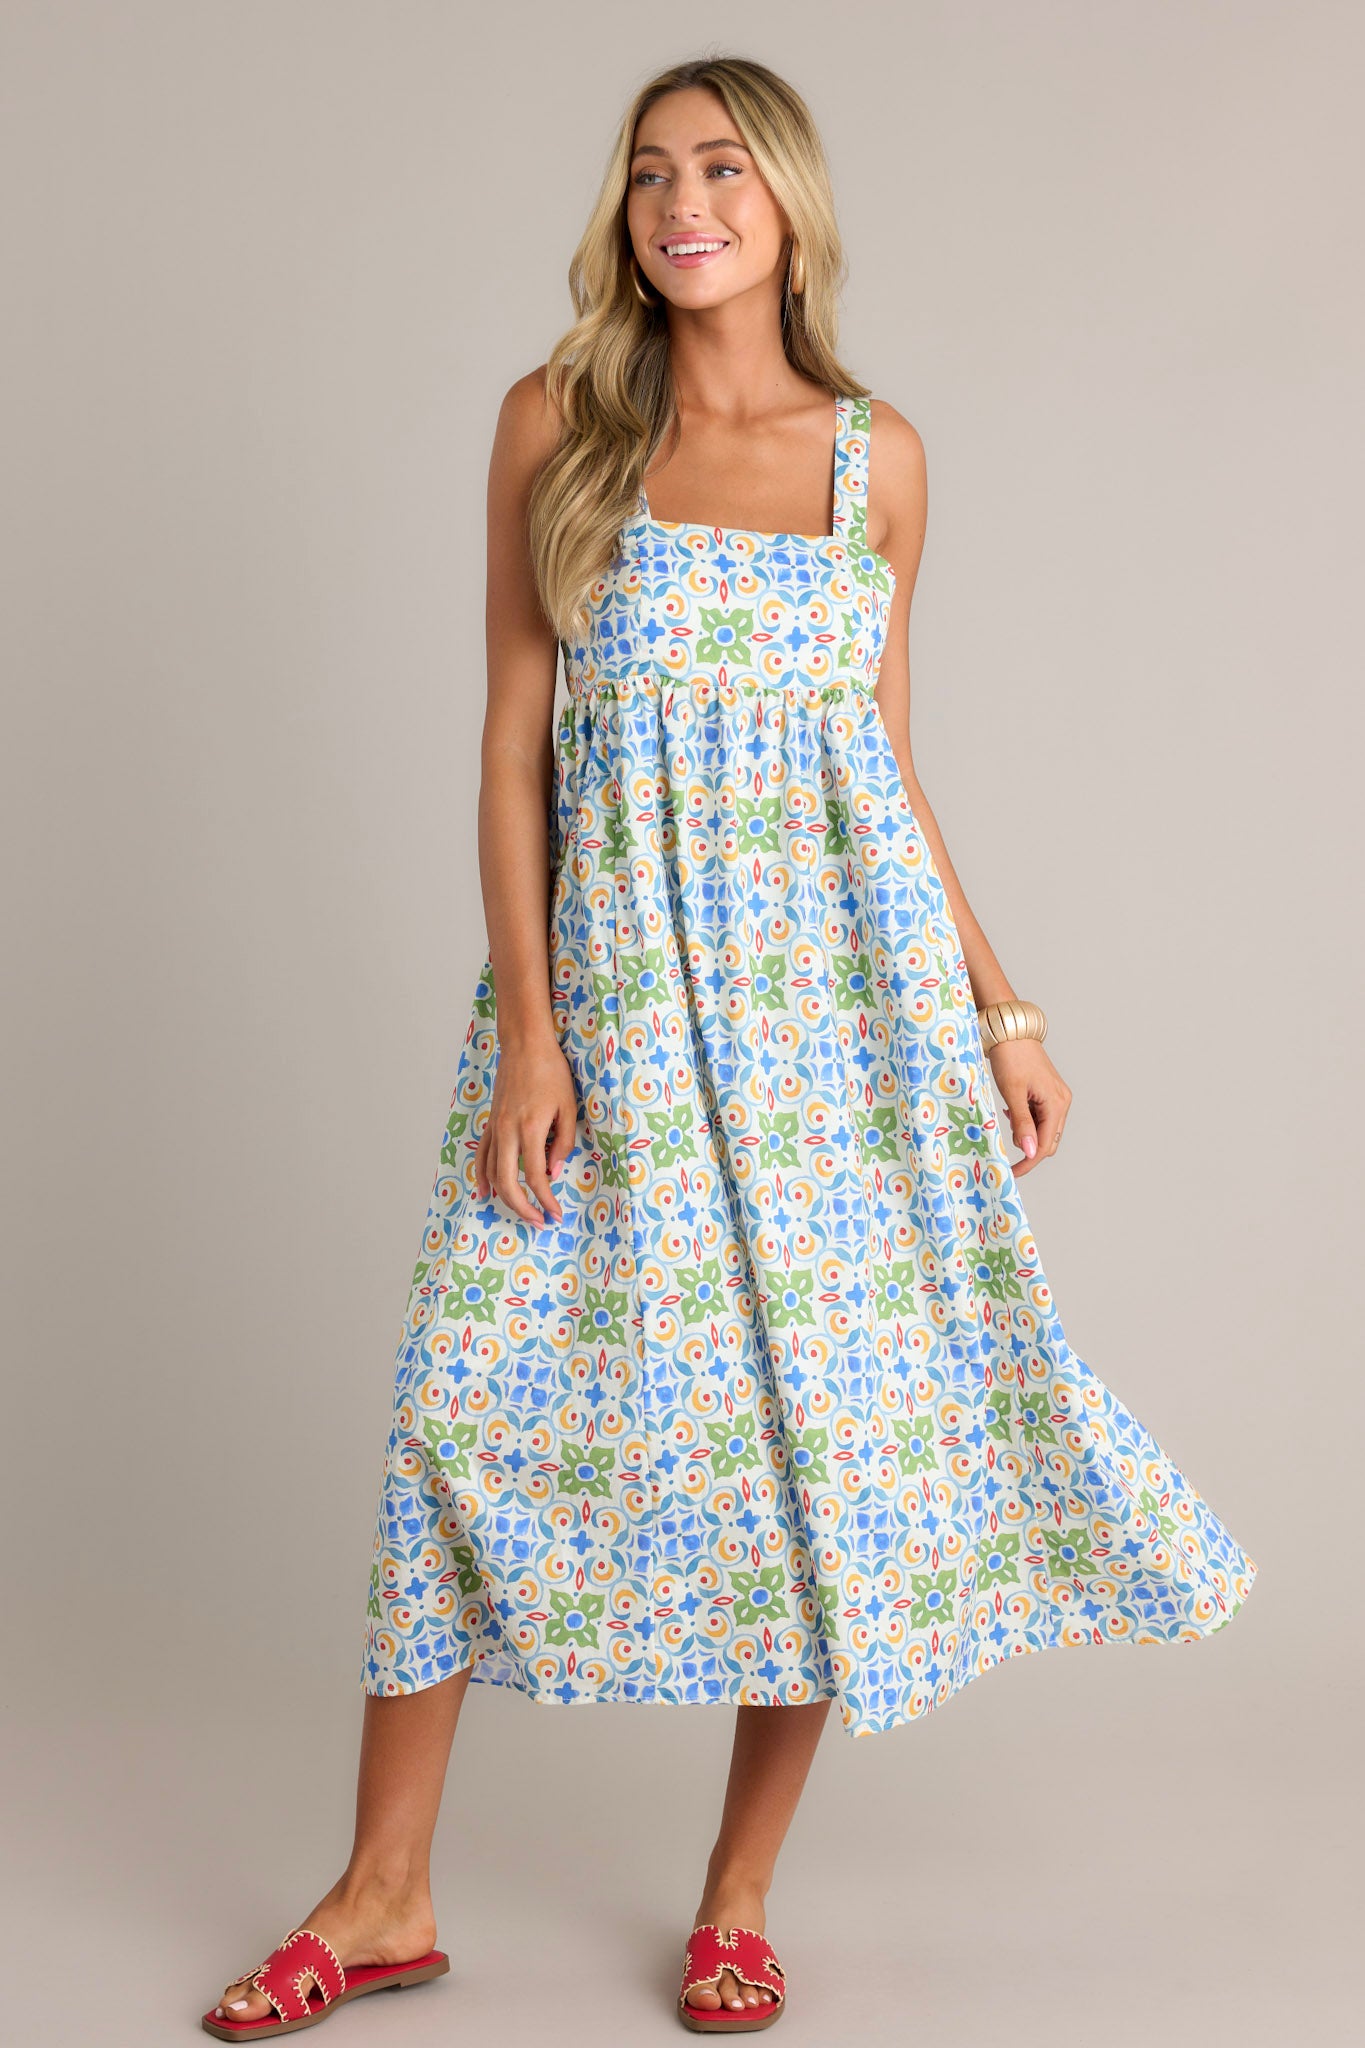 Full length view of a white midi dress with a square neckline, self-tie adjustable straps, a colorful pattern, functional hip pockets, and a flowing silhouette